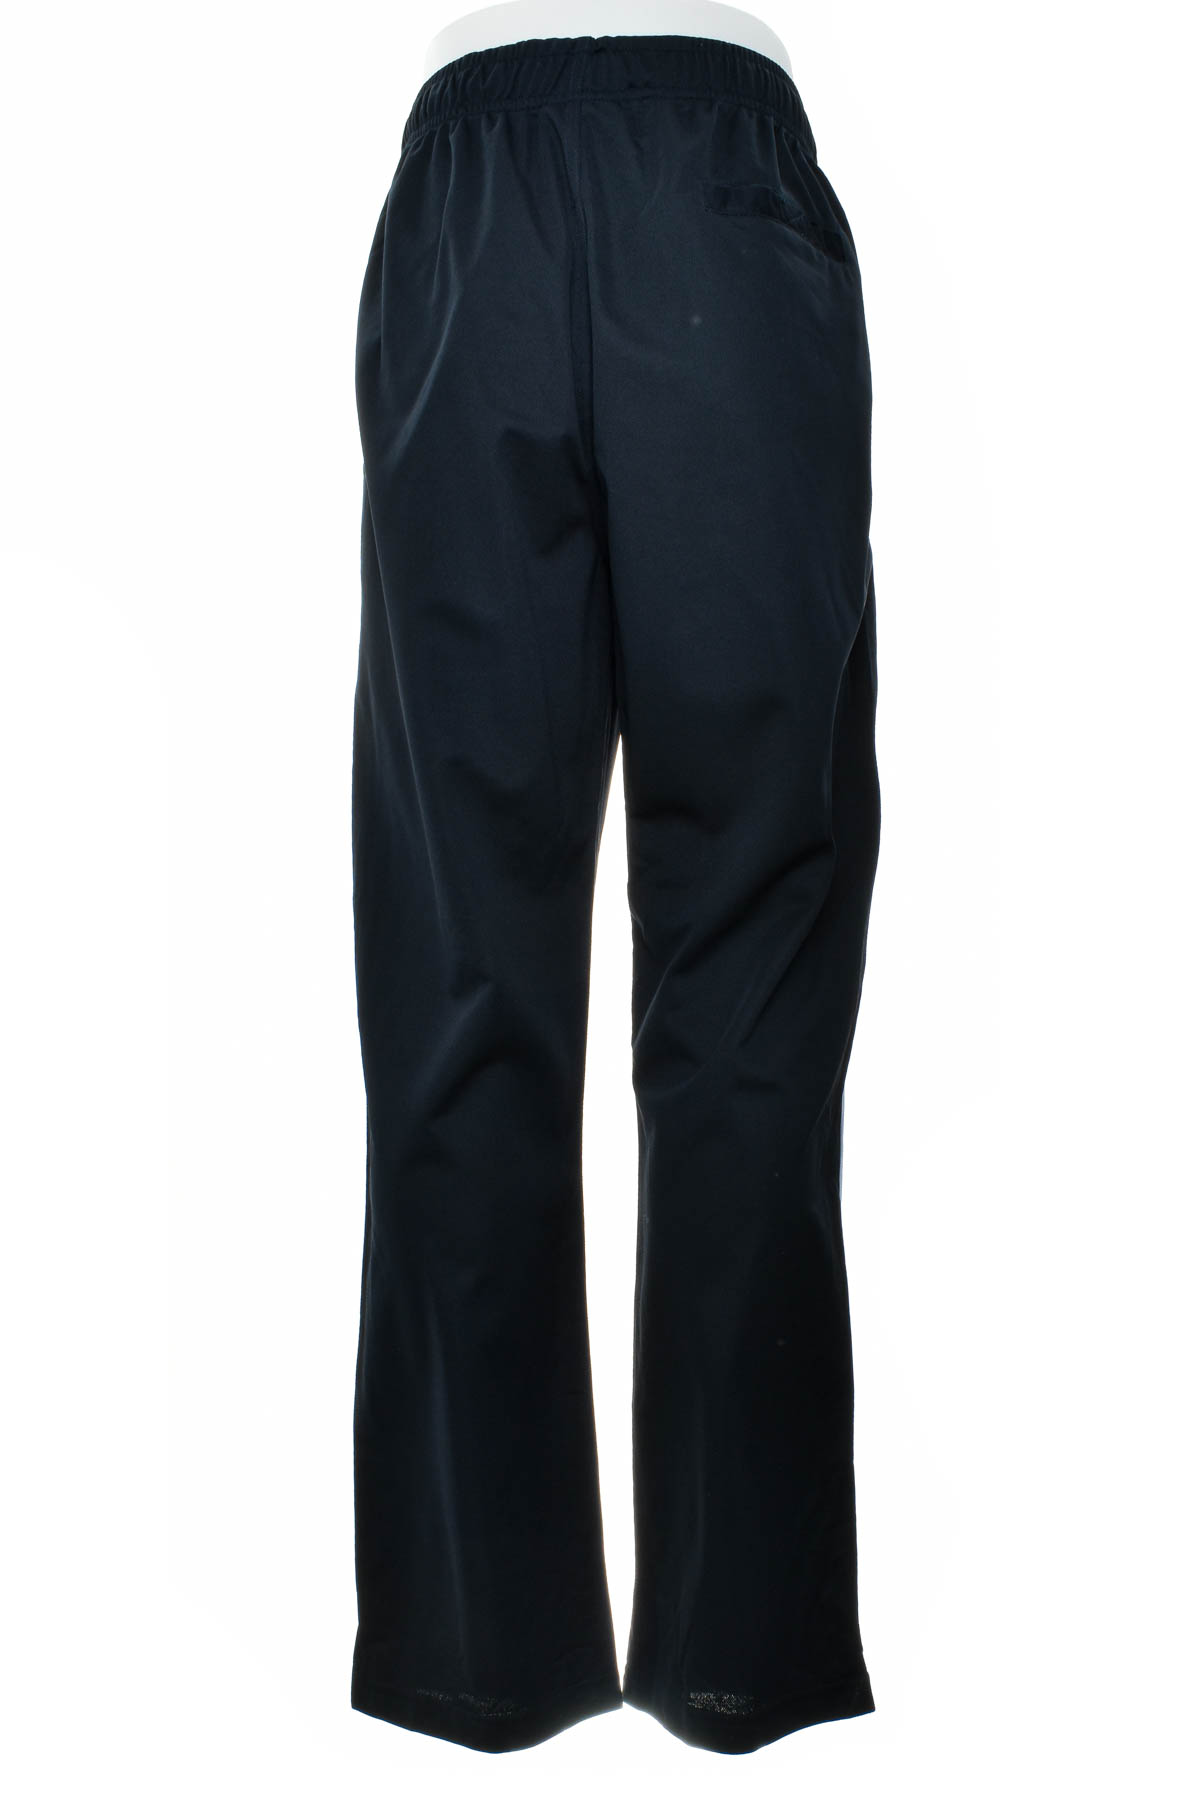 Men's trousers - LOWES - 1